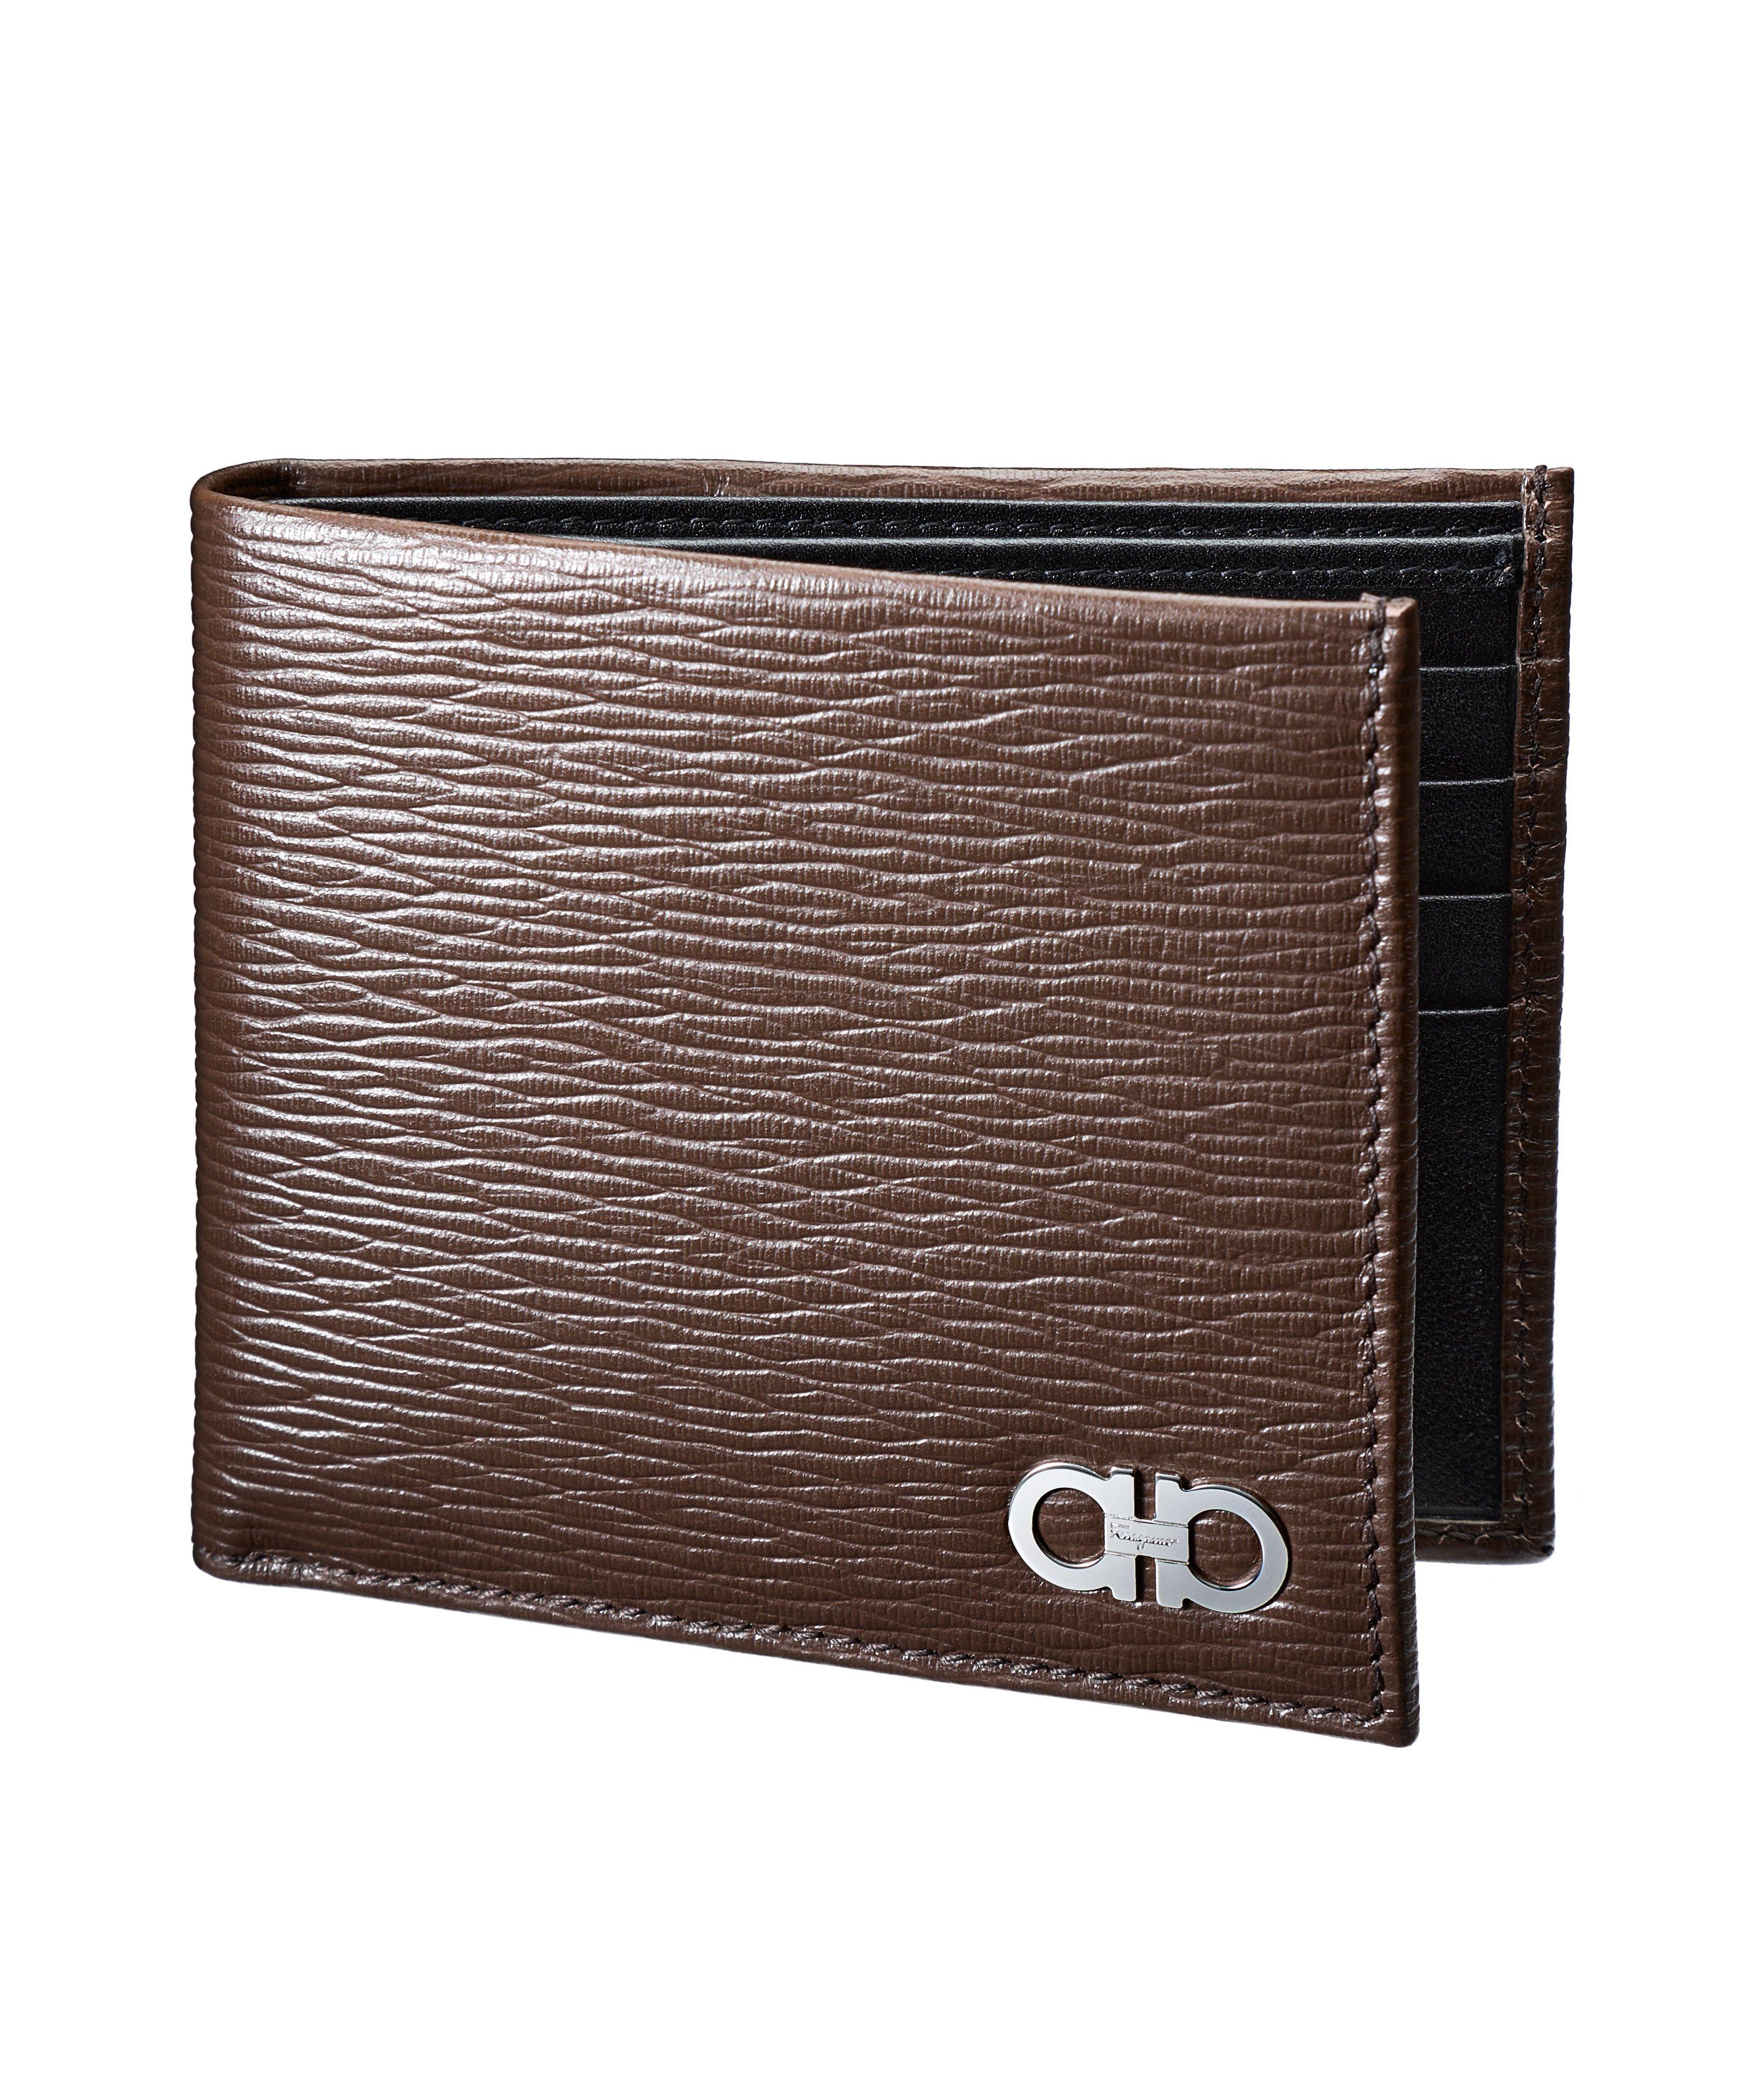 Gancini Textured Leather Bifold Wallet image 0